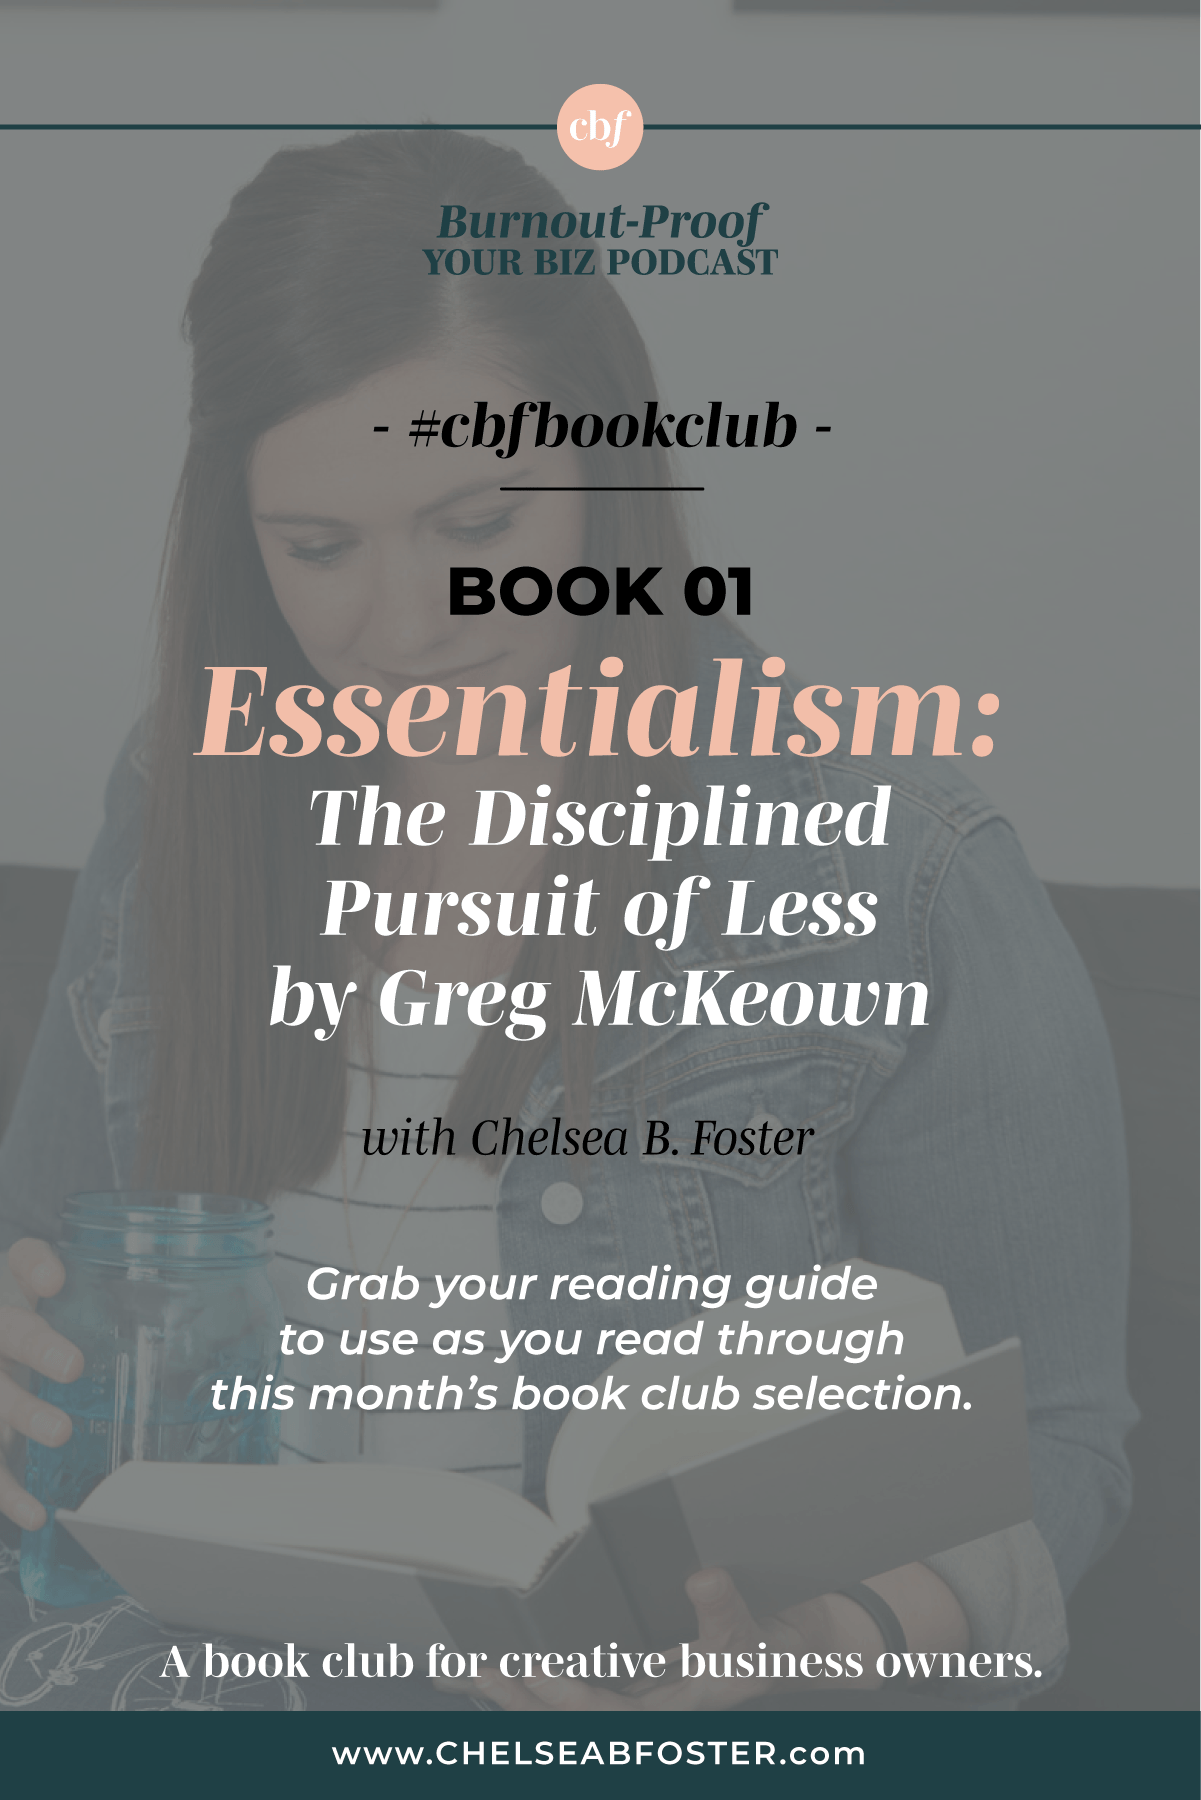 Burnout-Proof Your Biz with Chelsea B Foster | #cbfbookclub - Essentialism: The Disciplined Pursuit of Less by Greg McKeown. Download your reading guide now at www.chelseabfoster.com/cbfbookclub